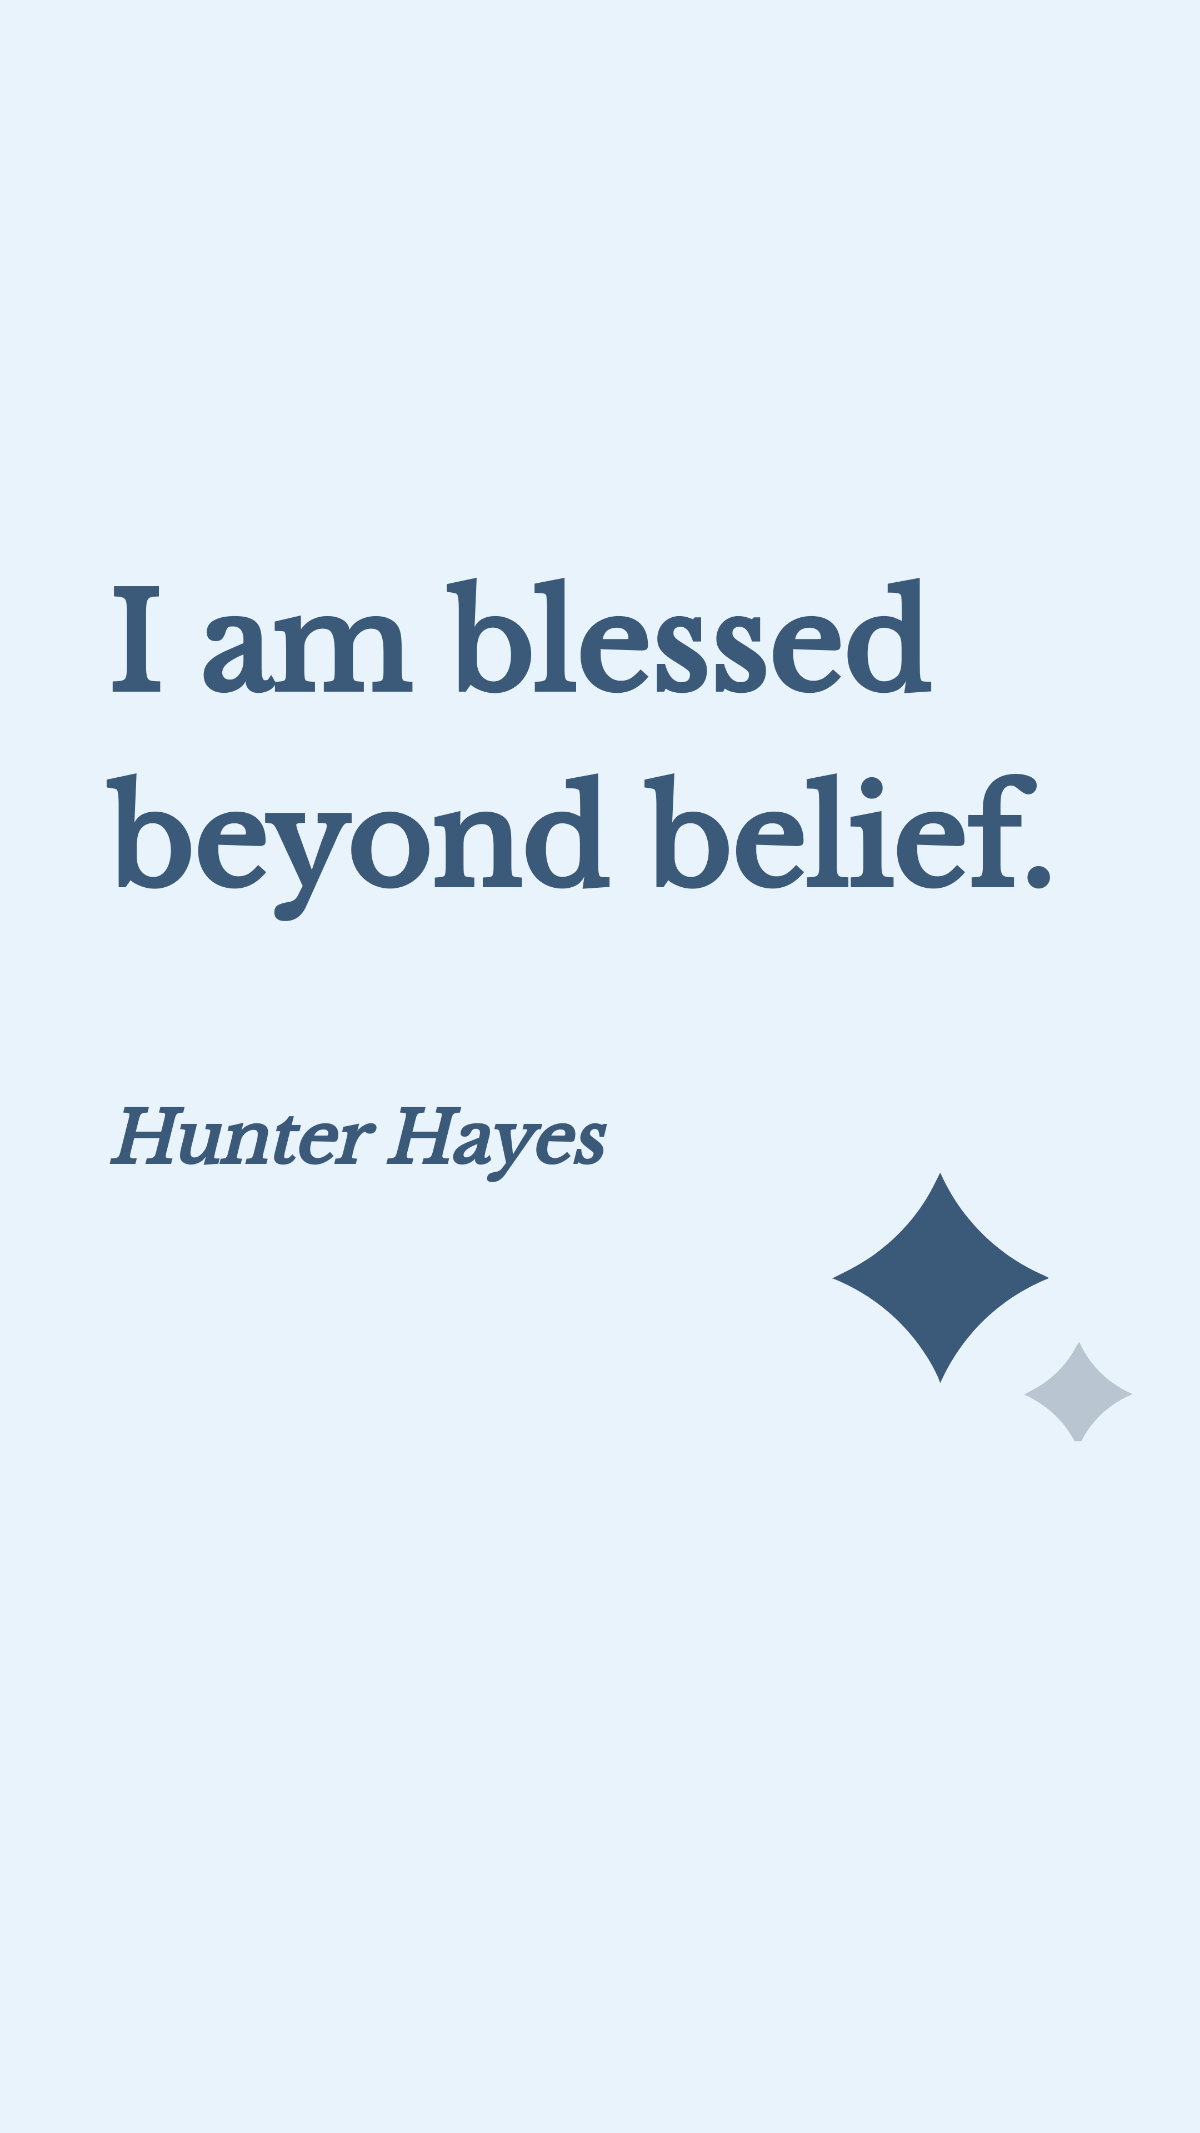 Hunter Hayes - I am blessed beyond belief. Template